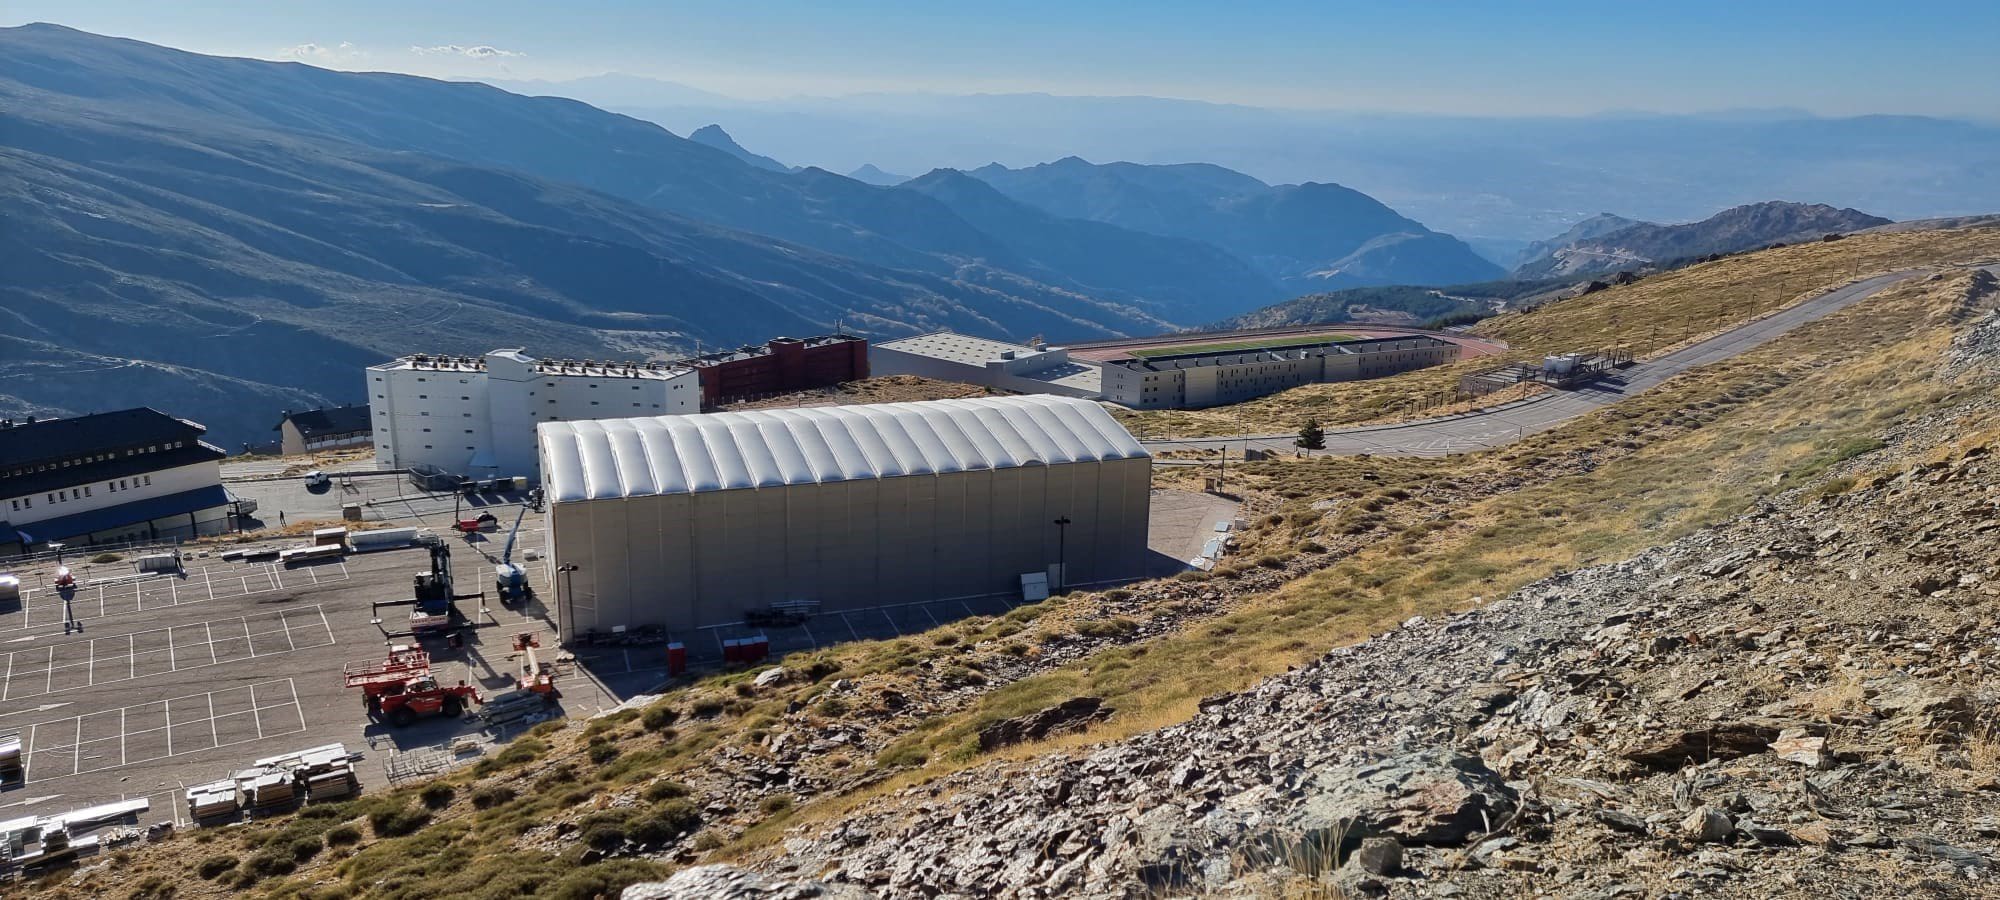 High-Altitude Studio Construction for Netflix Production in Sierra Nevada